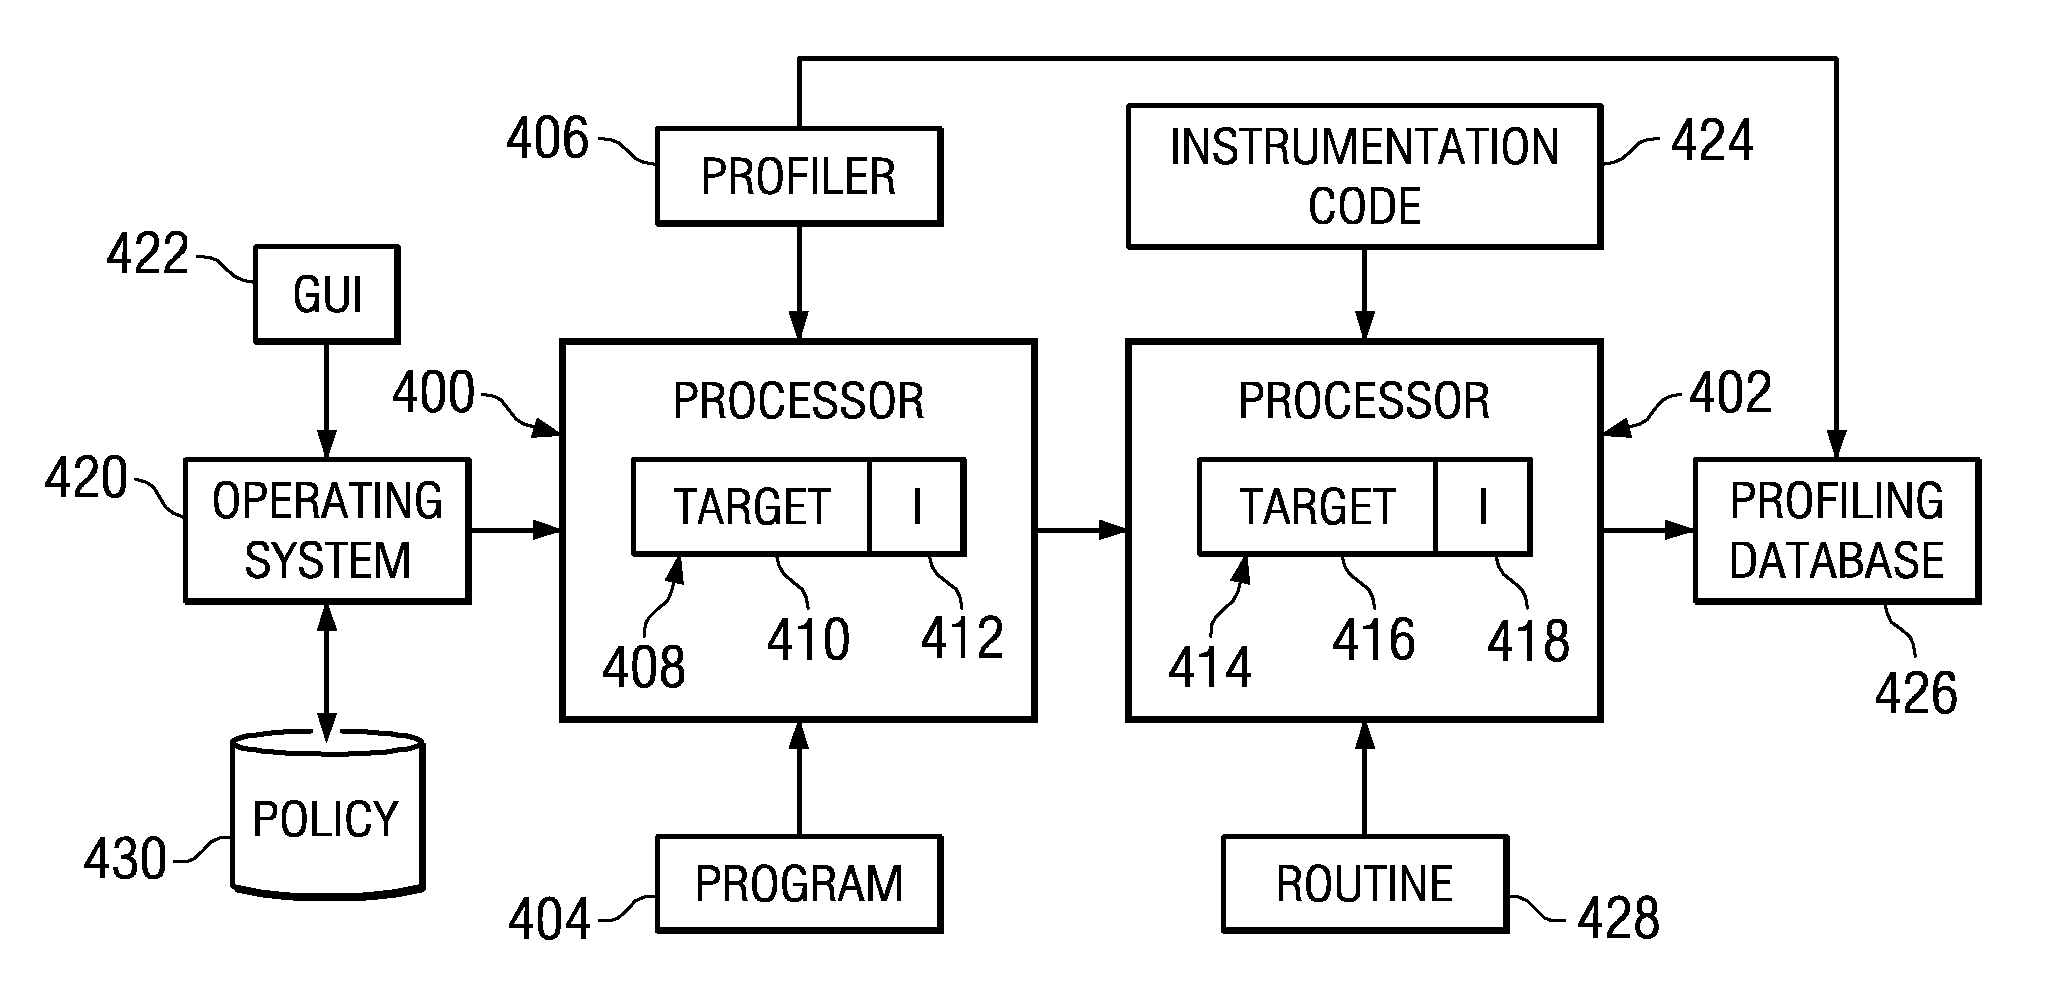 Method and apparatus for executing instrumentation code within alternative processor resources